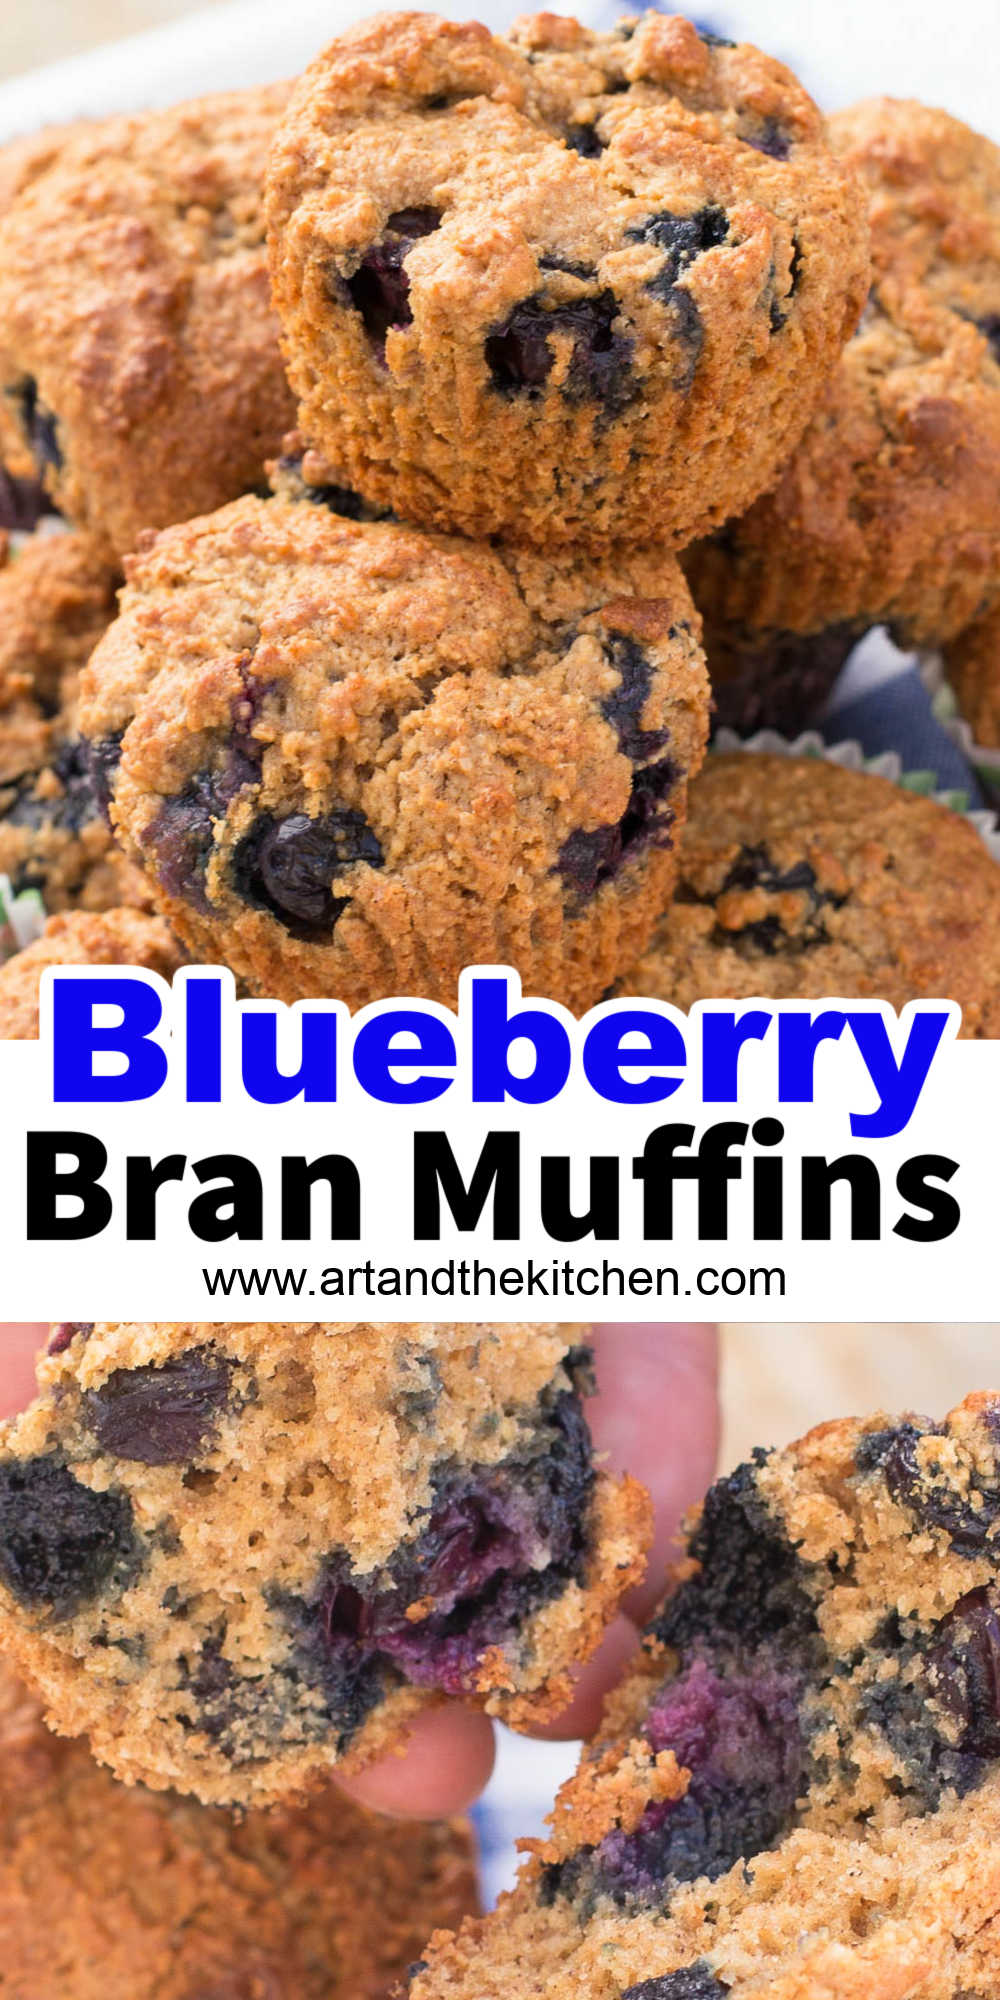 These healthy blueberry bran muffins are made with fresh blueberries, oat bran. A great source of fiber and perfect for breakfast on the go or a healthy snack. via @artandthekitch